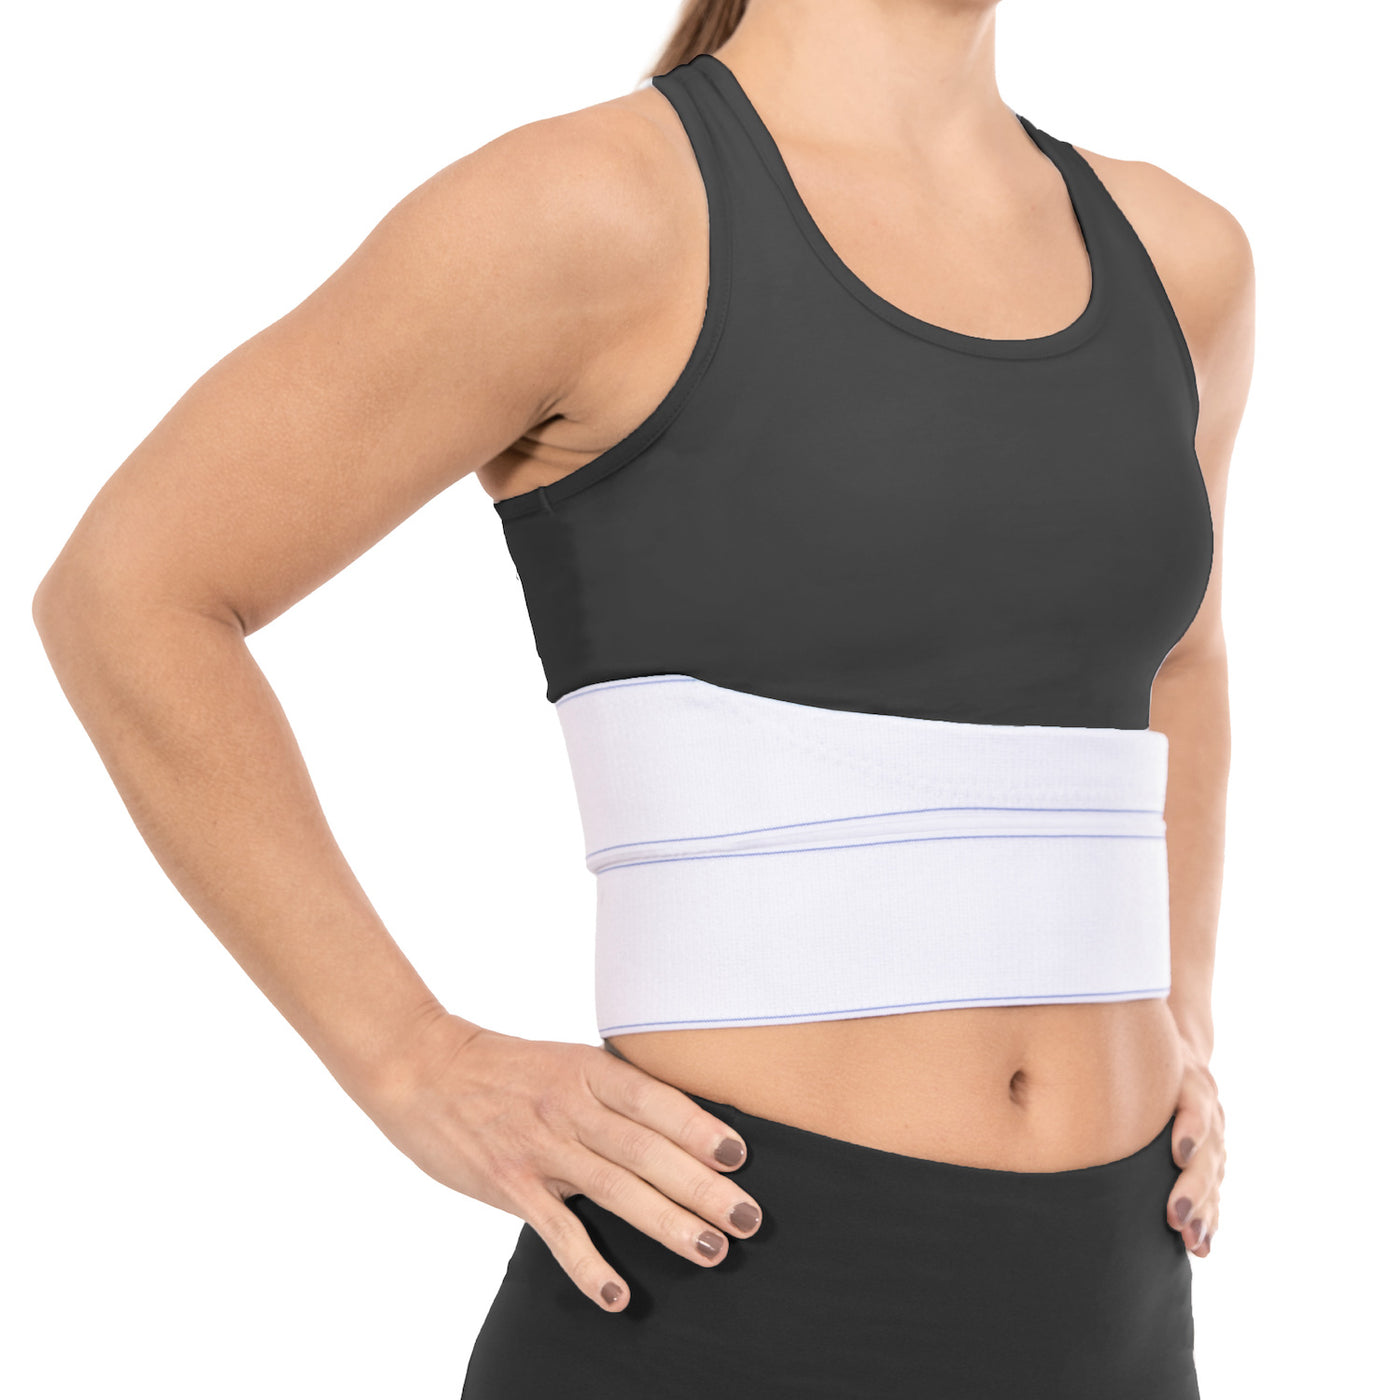 ARTIBETTER Rib and Chest Support Brace Broken Rib Brace Breathable Rib Belt  for Sore or Bruised Ribs Support Sternum Injuries Dislocated Ribs  Protection 